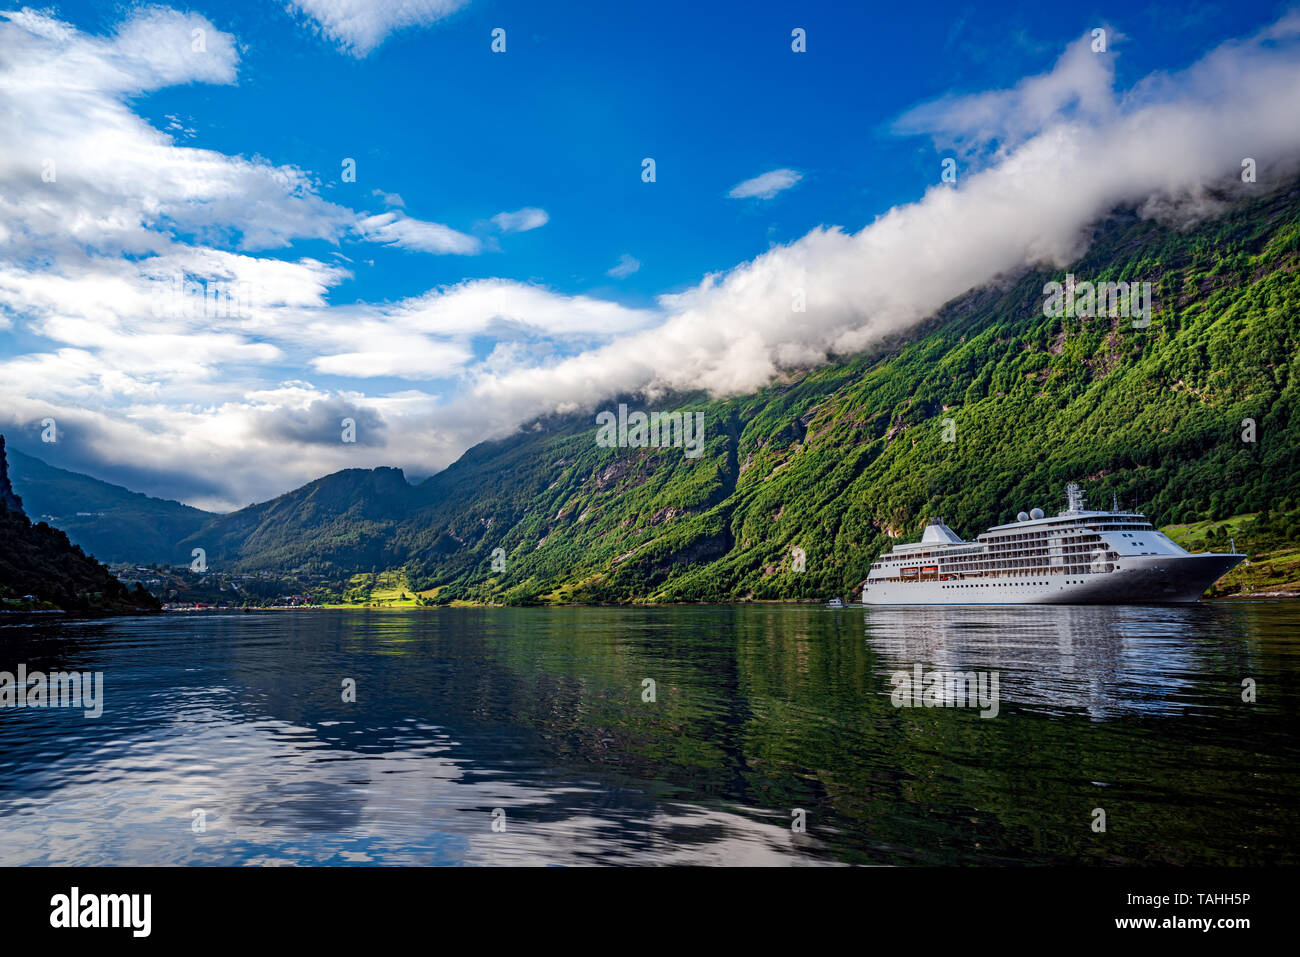 Geiranger fjord, Beautiful Nature Norway. The fjord is one of Norway's most visited tourist sites. Geiranger Fjord, a UNESCO World Heritage Site Stock Photo